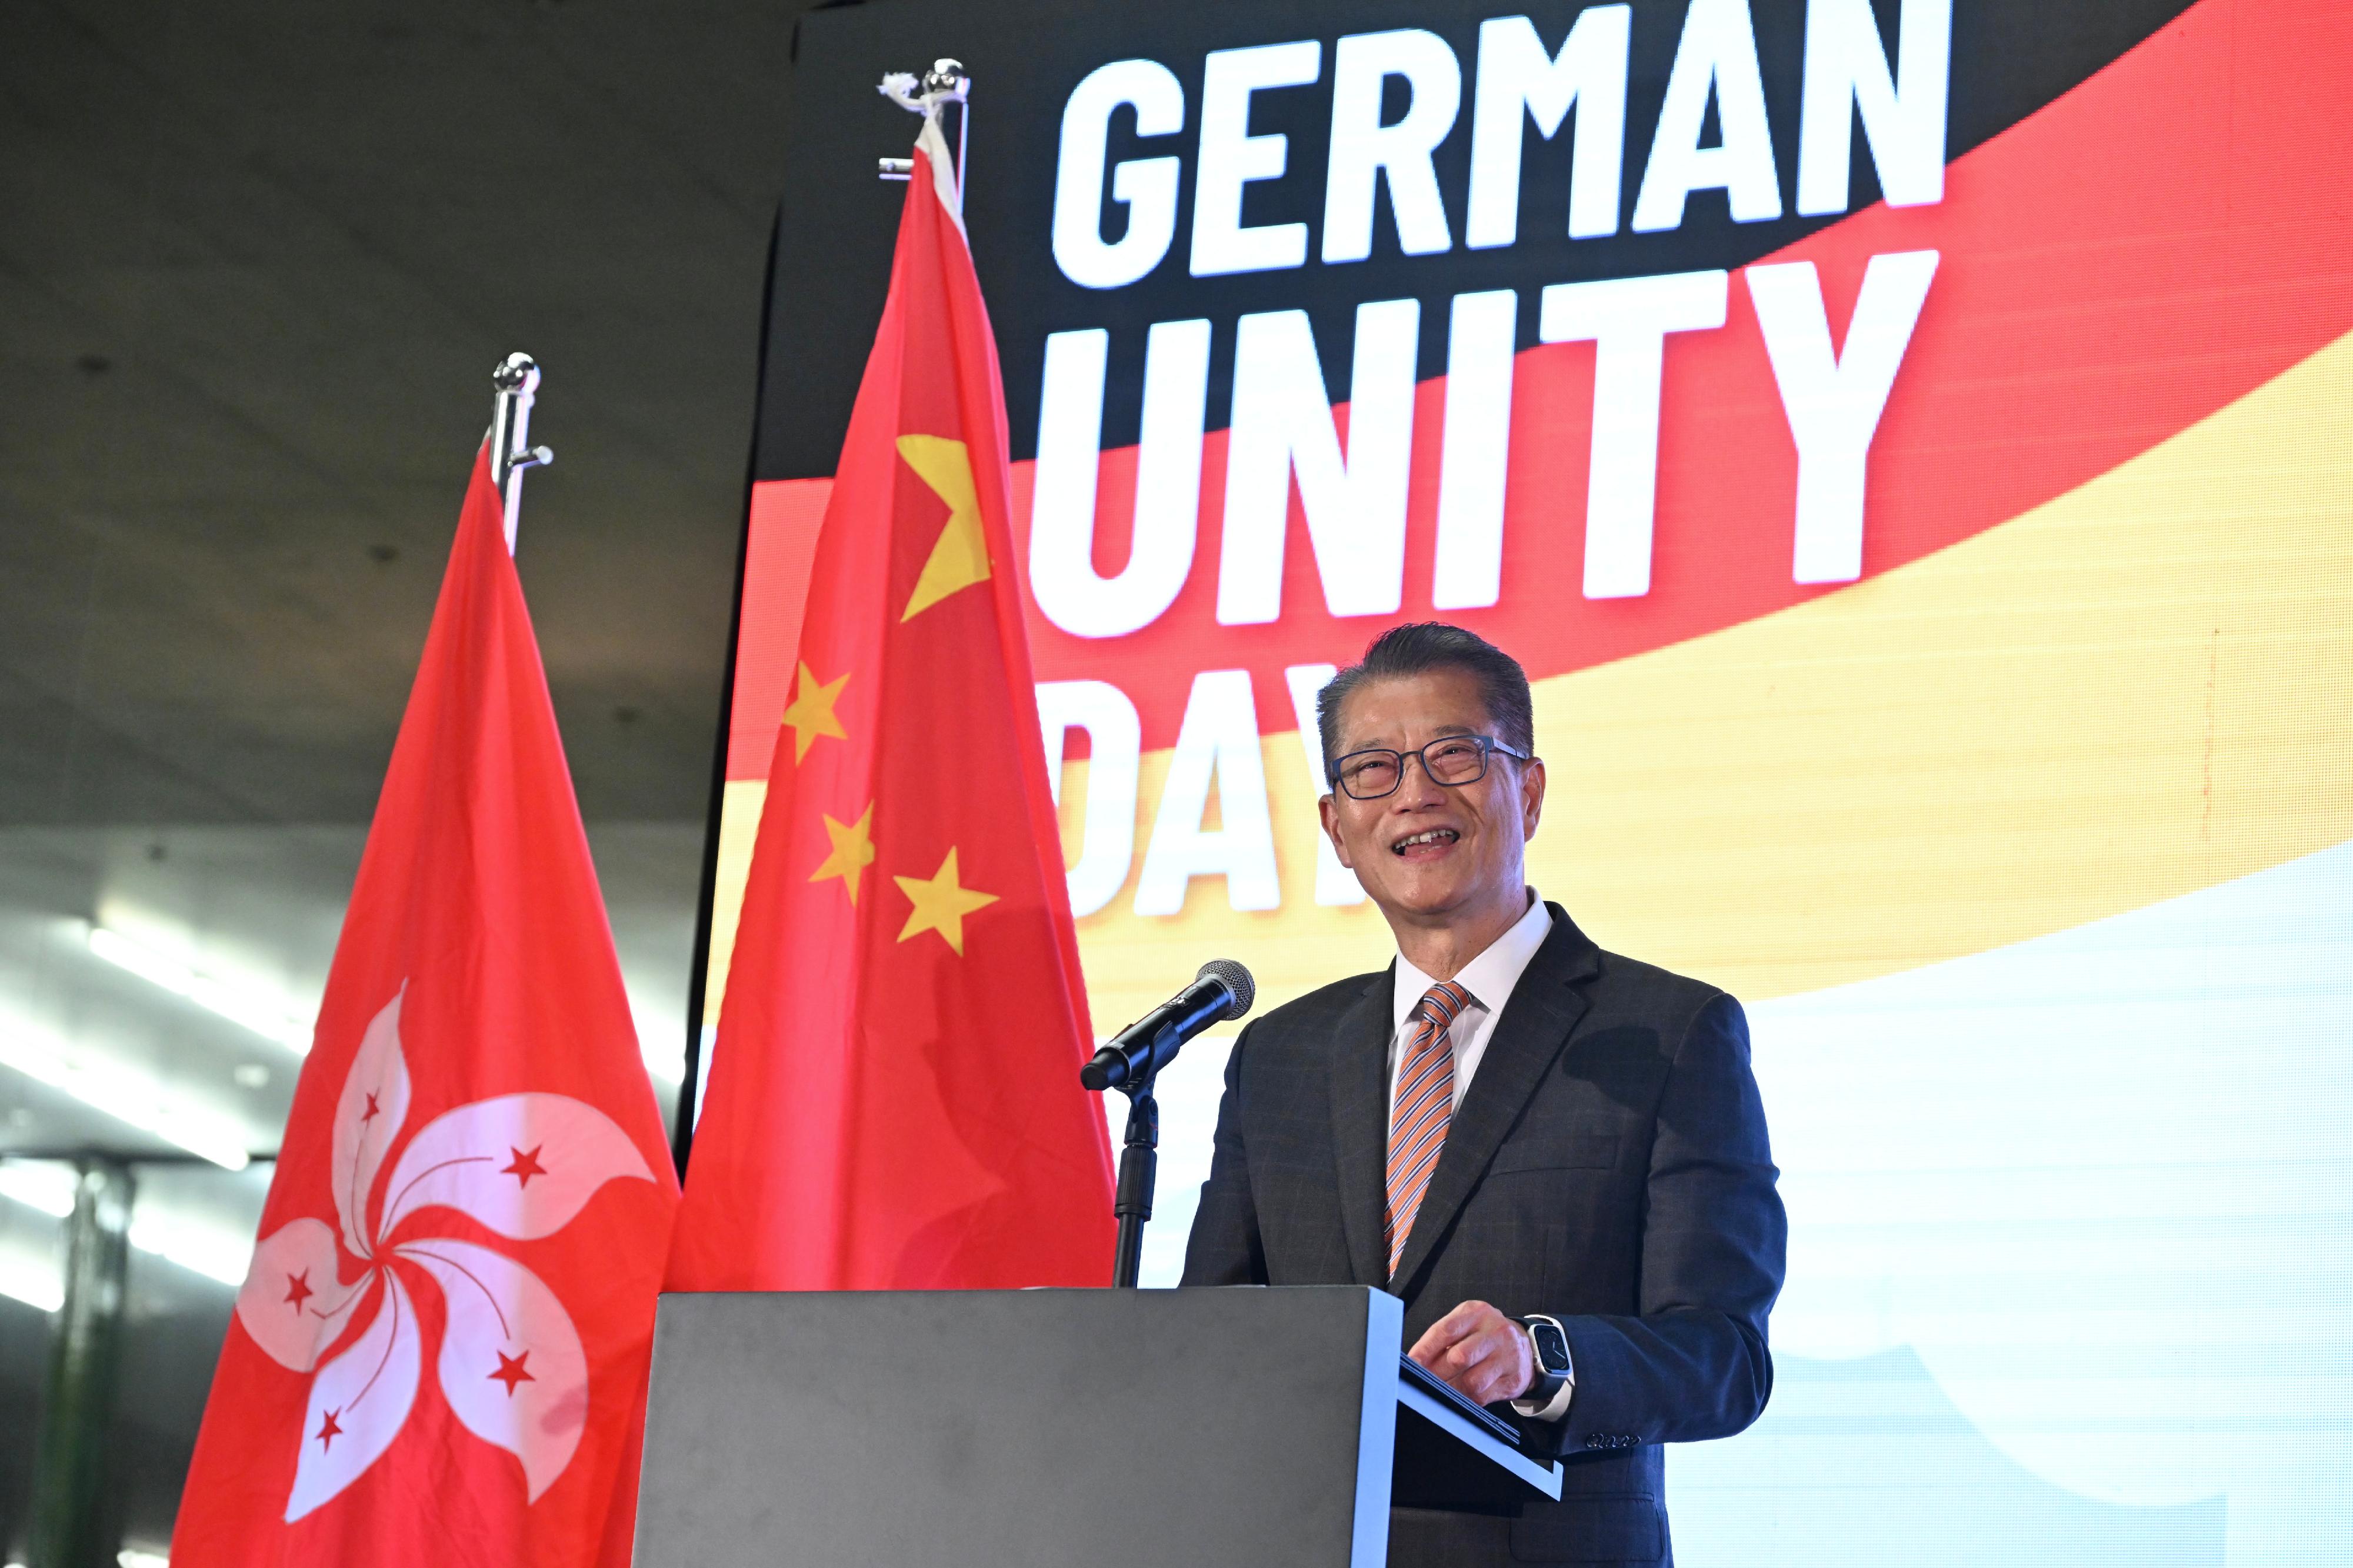 The Financial Secretary, Mr Paul Chan, speaks at the Day of German Unity and the Triple Anniversary Celebration of German Institutions in Hong Kong today (October 9).